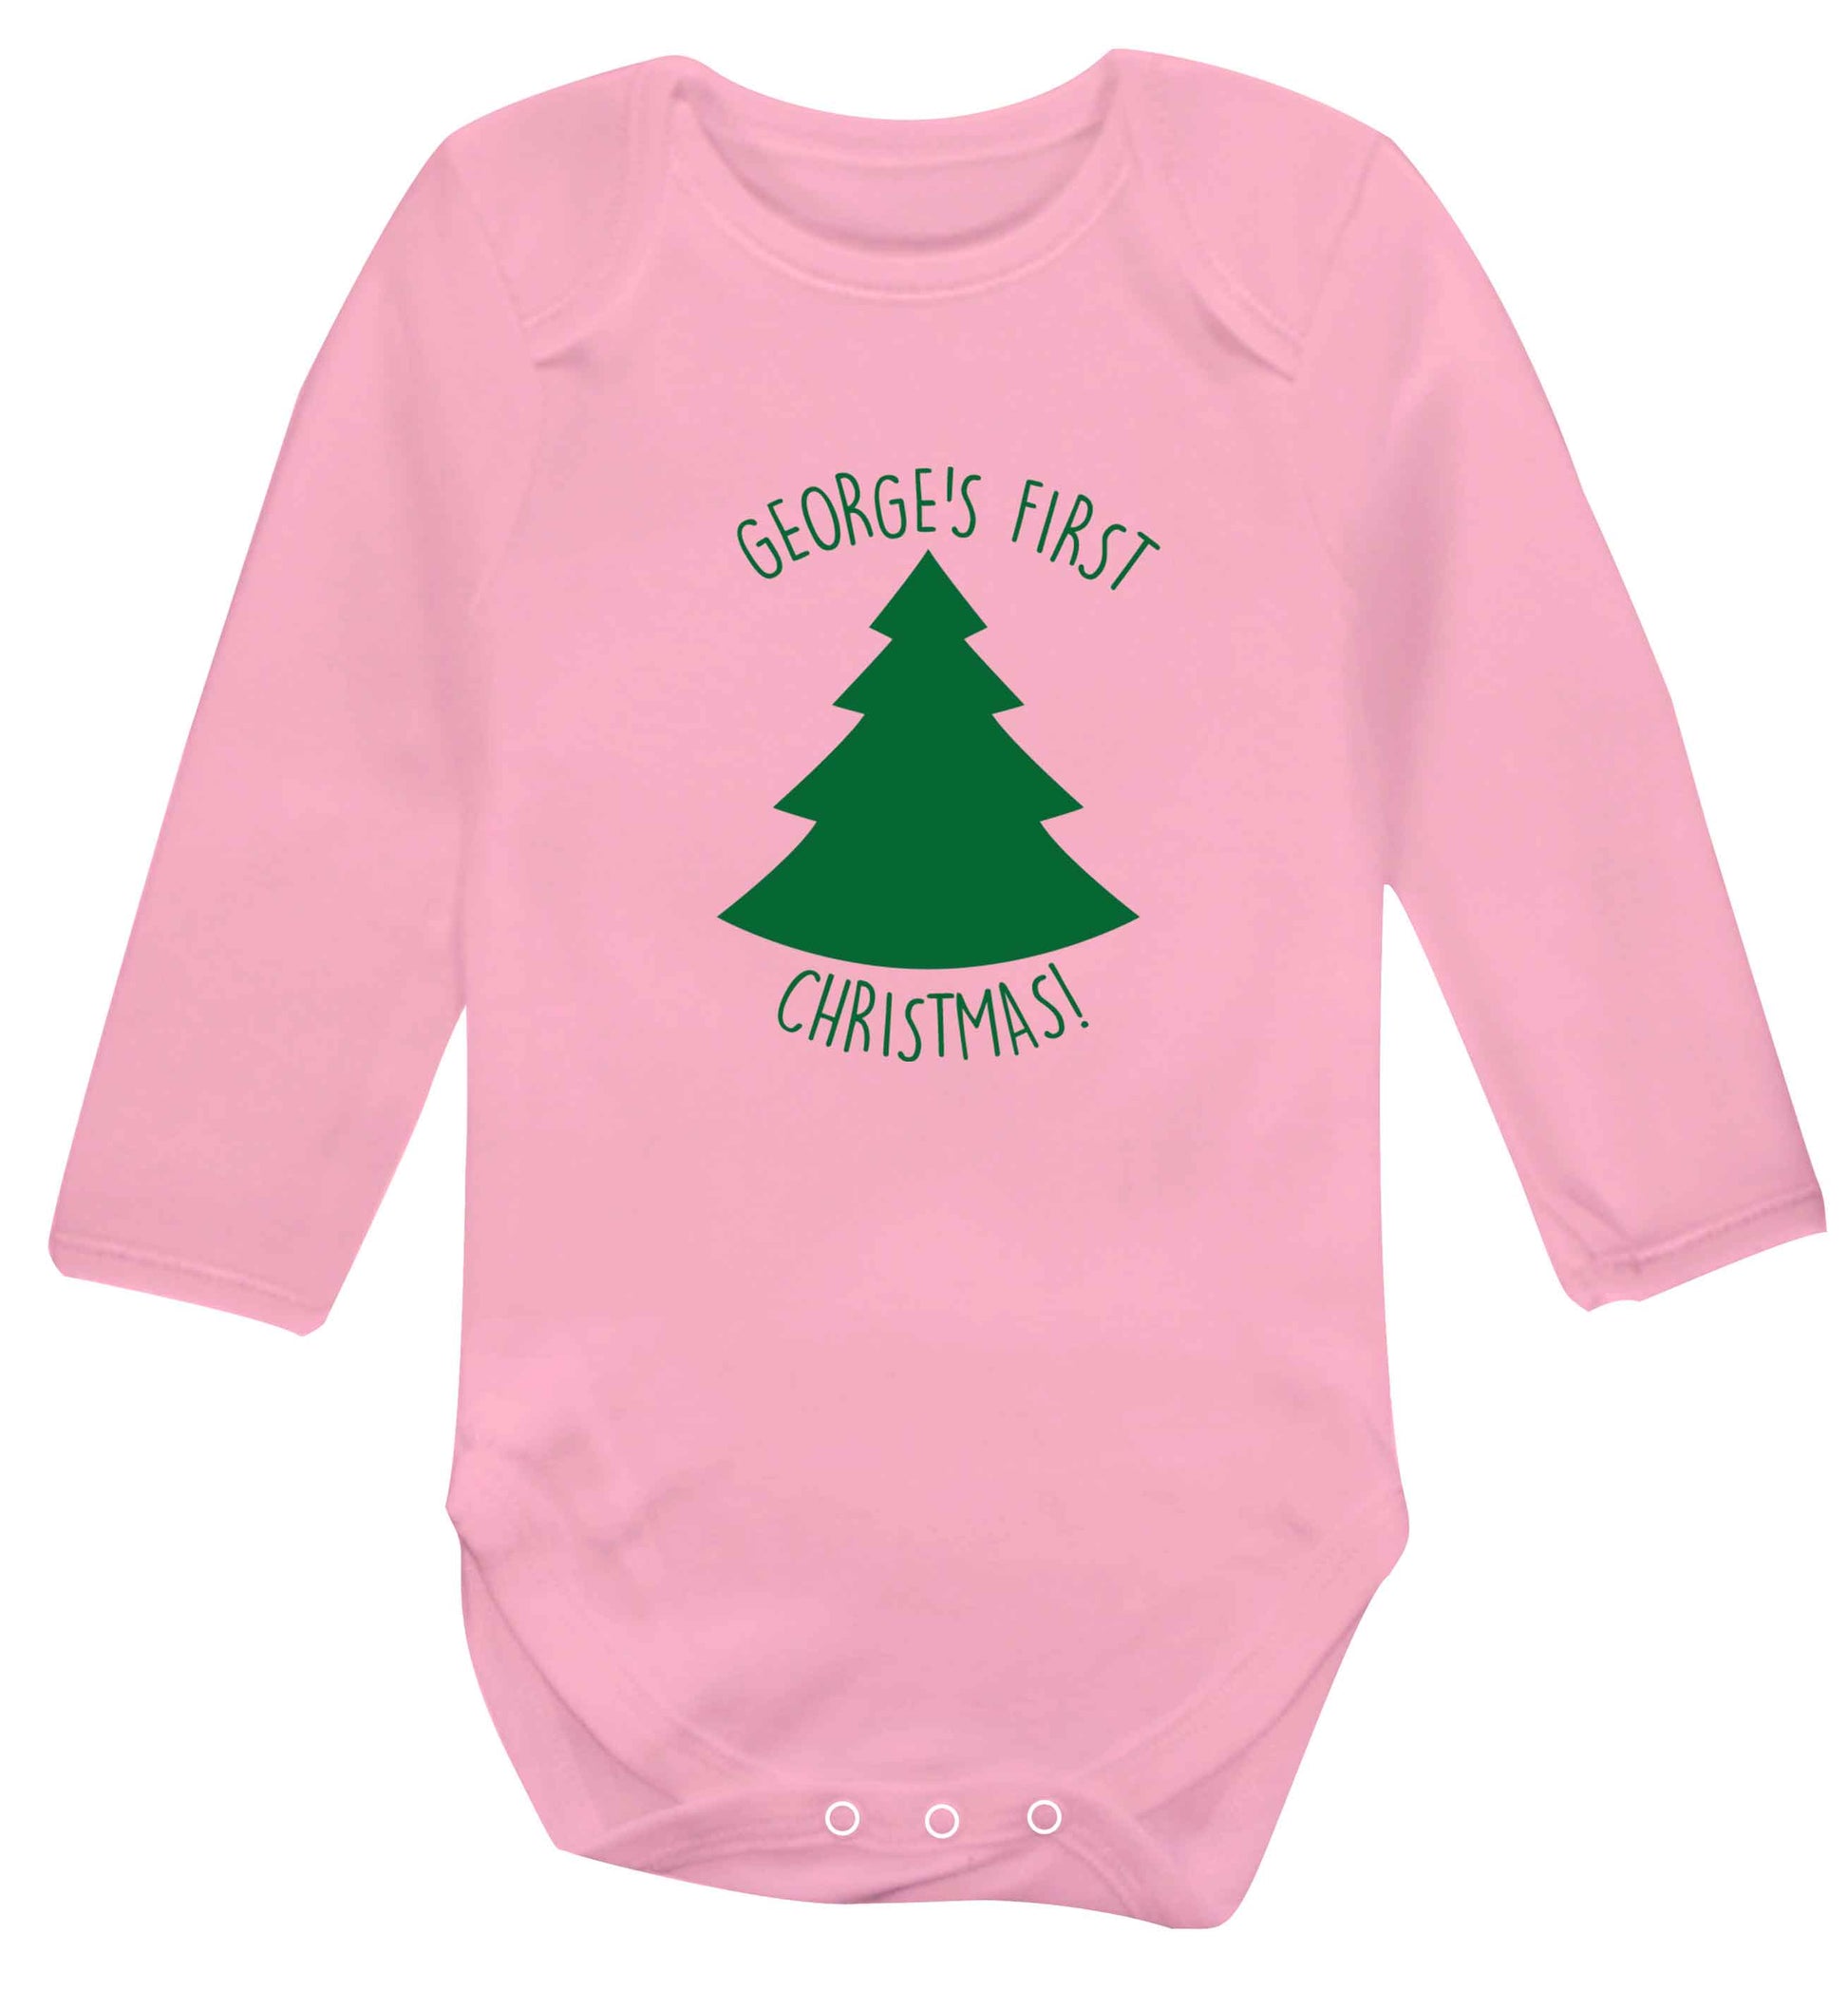 Personalised it's my first Christmas - tree baby vest long sleeved pale pink 6-12 months